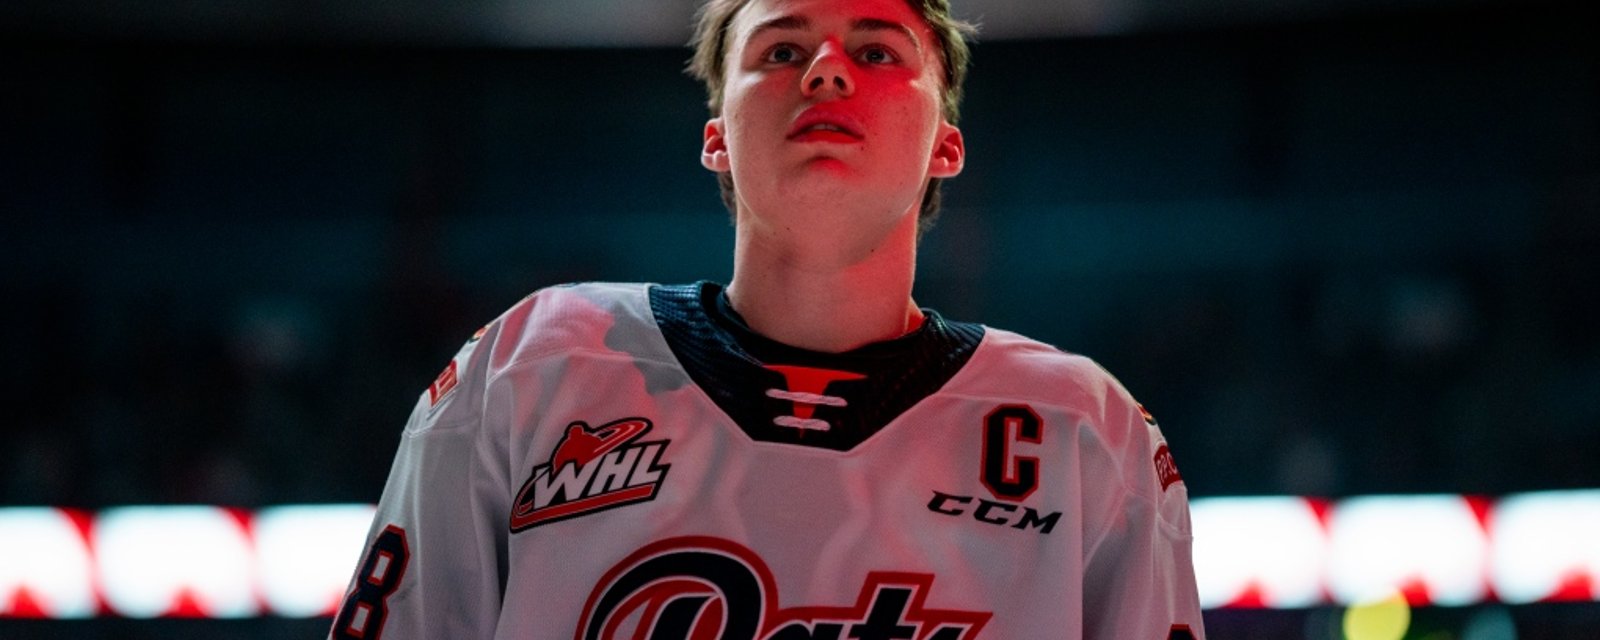 Heartbreaking story on Connor Bedard emerges ahead of draft lottery